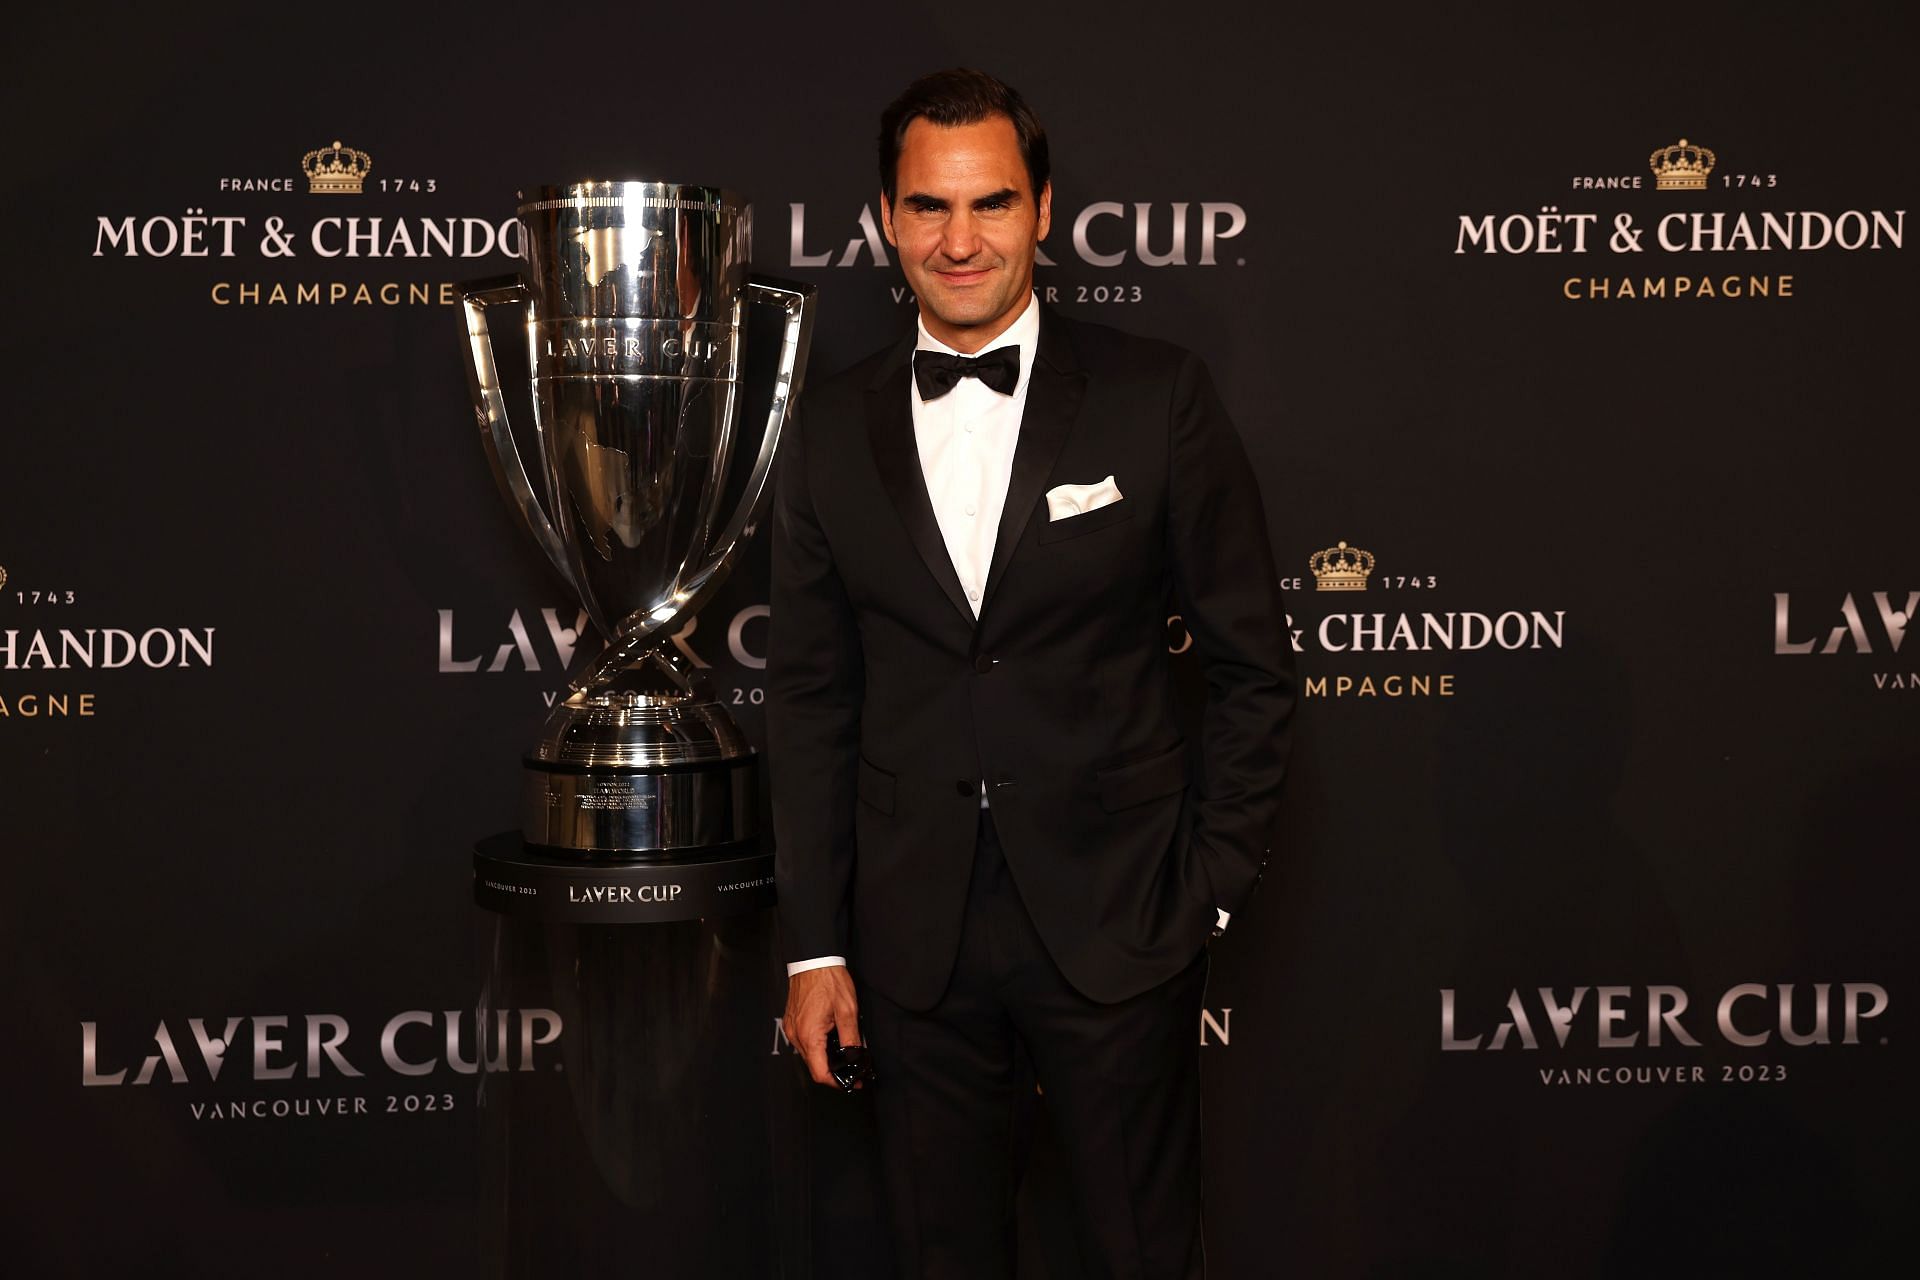 Roger Federer poses for a photo at the 2023 Laver Cup in Vancouver.